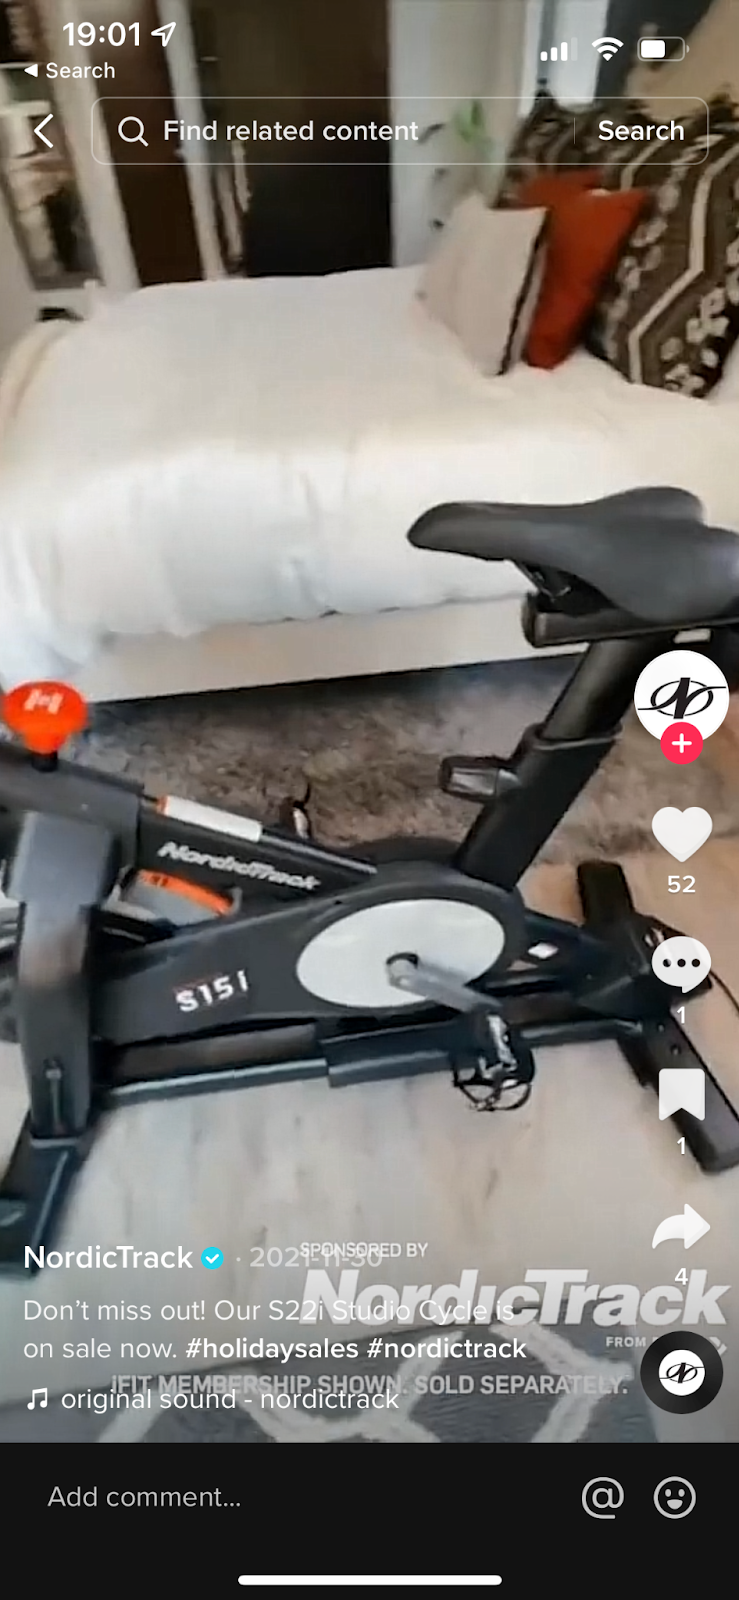 NordicTrack's Instagram video showing its new S22i Studio Cycle